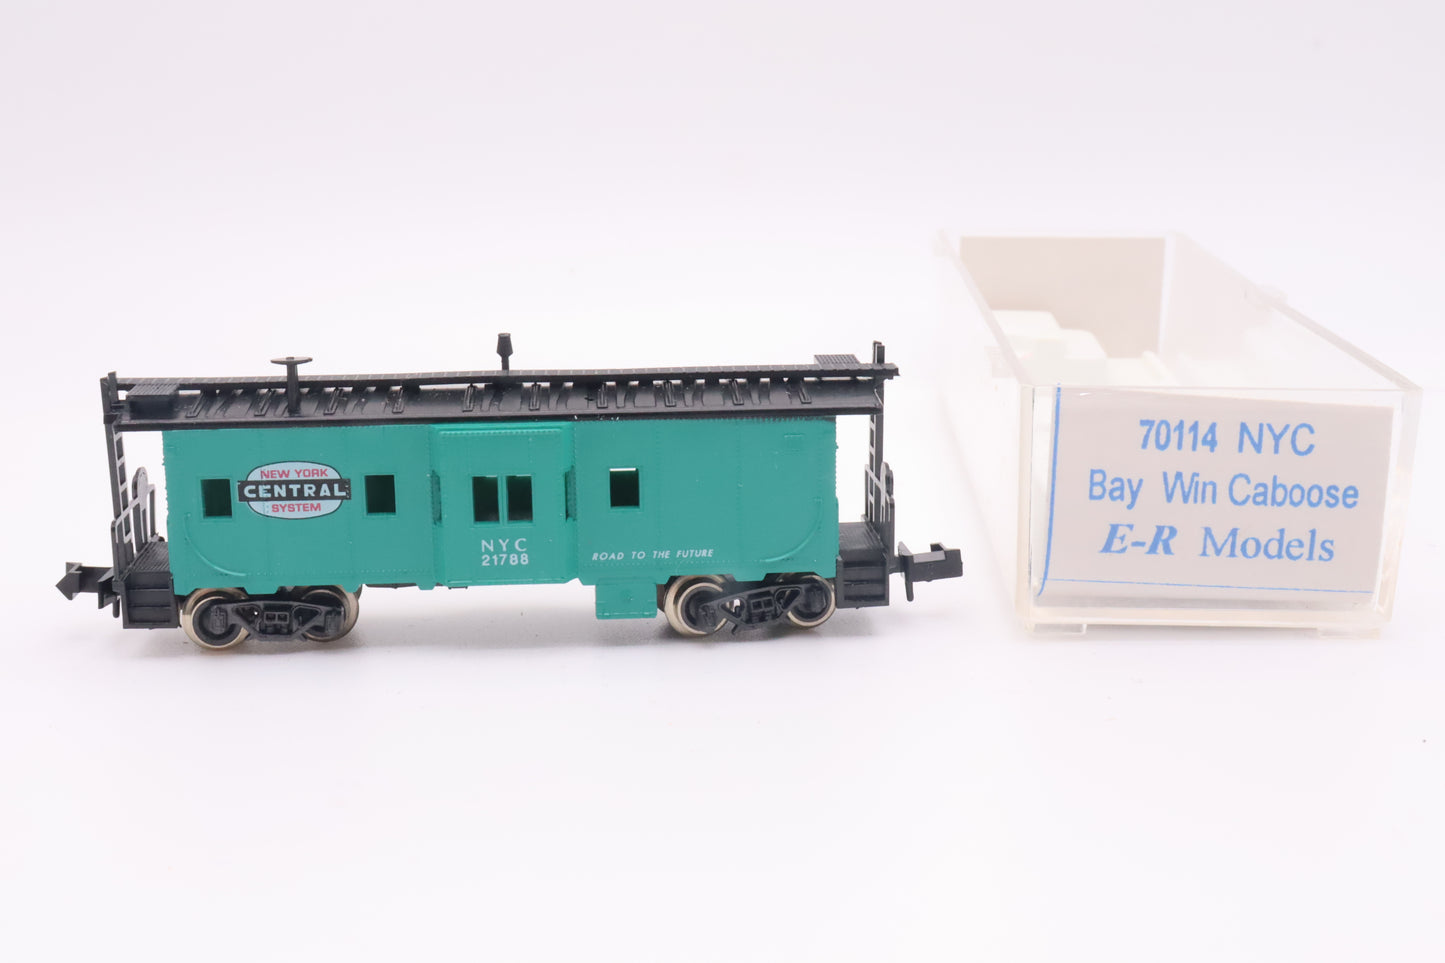 E-R Models - 70114 - Caboose w/Bay Window - New York Central - NYC-21788